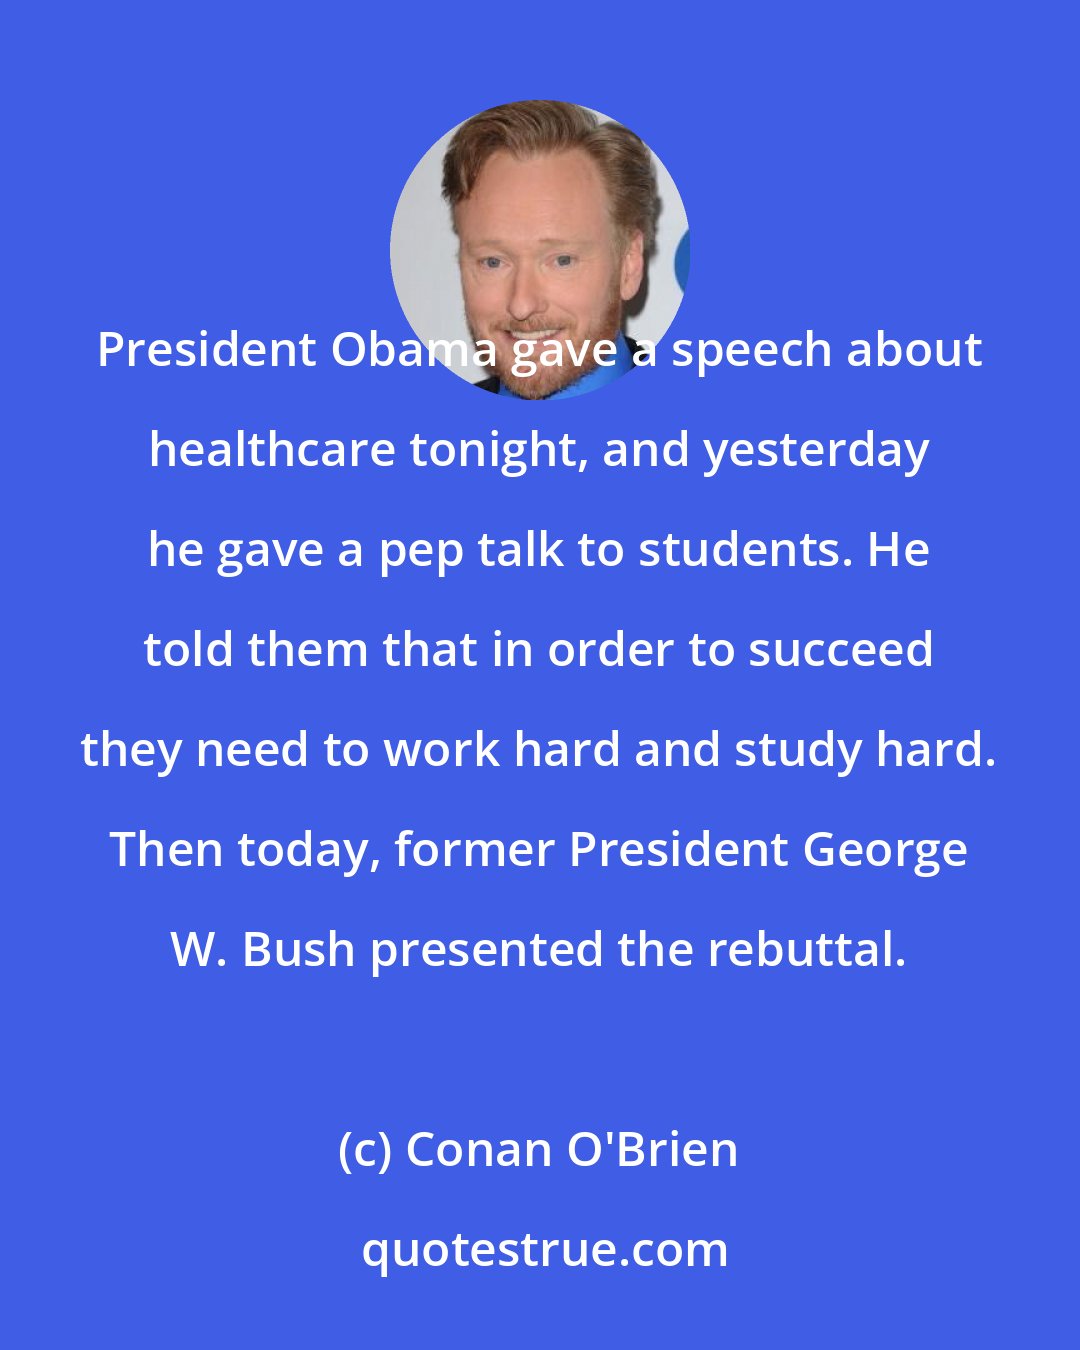 Conan O'Brien: President Obama gave a speech about healthcare tonight, and yesterday he gave a pep talk to students. He told them that in order to succeed they need to work hard and study hard. Then today, former President George W. Bush presented the rebuttal.